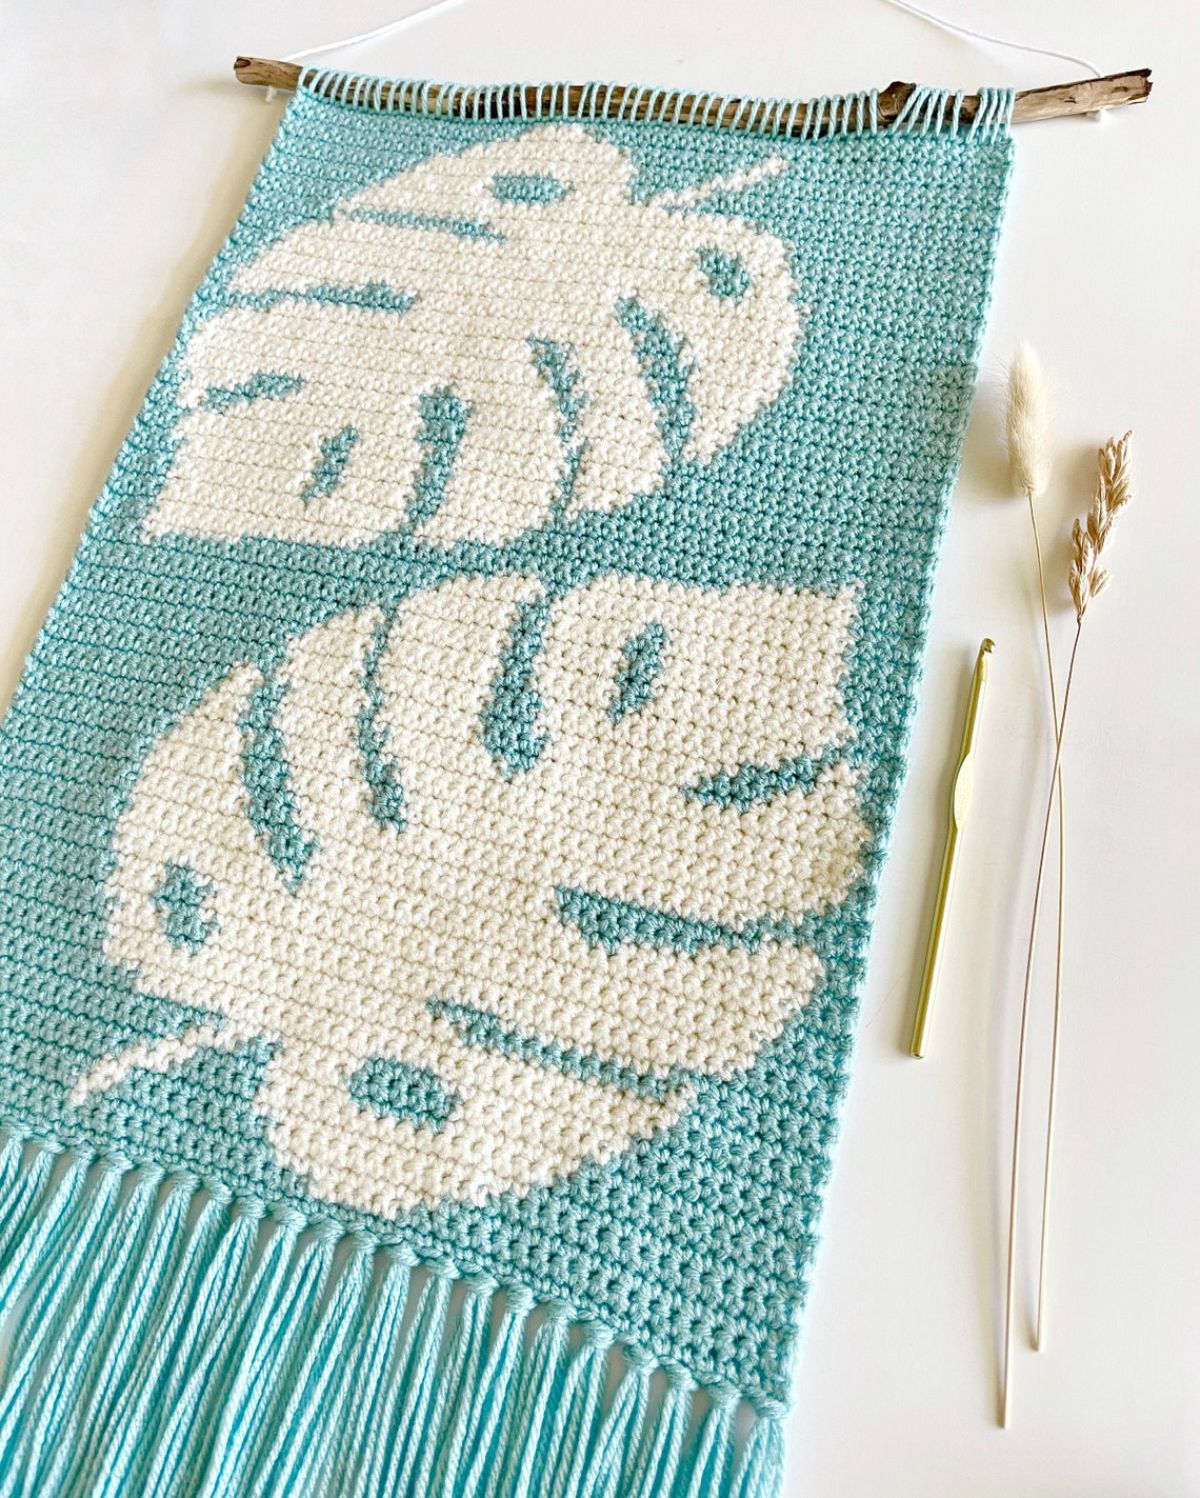 An aqua colored crochet hanging piece with large white leaves and blue tassels hung on a thin stick with a crochet hook and white leaves next to it.